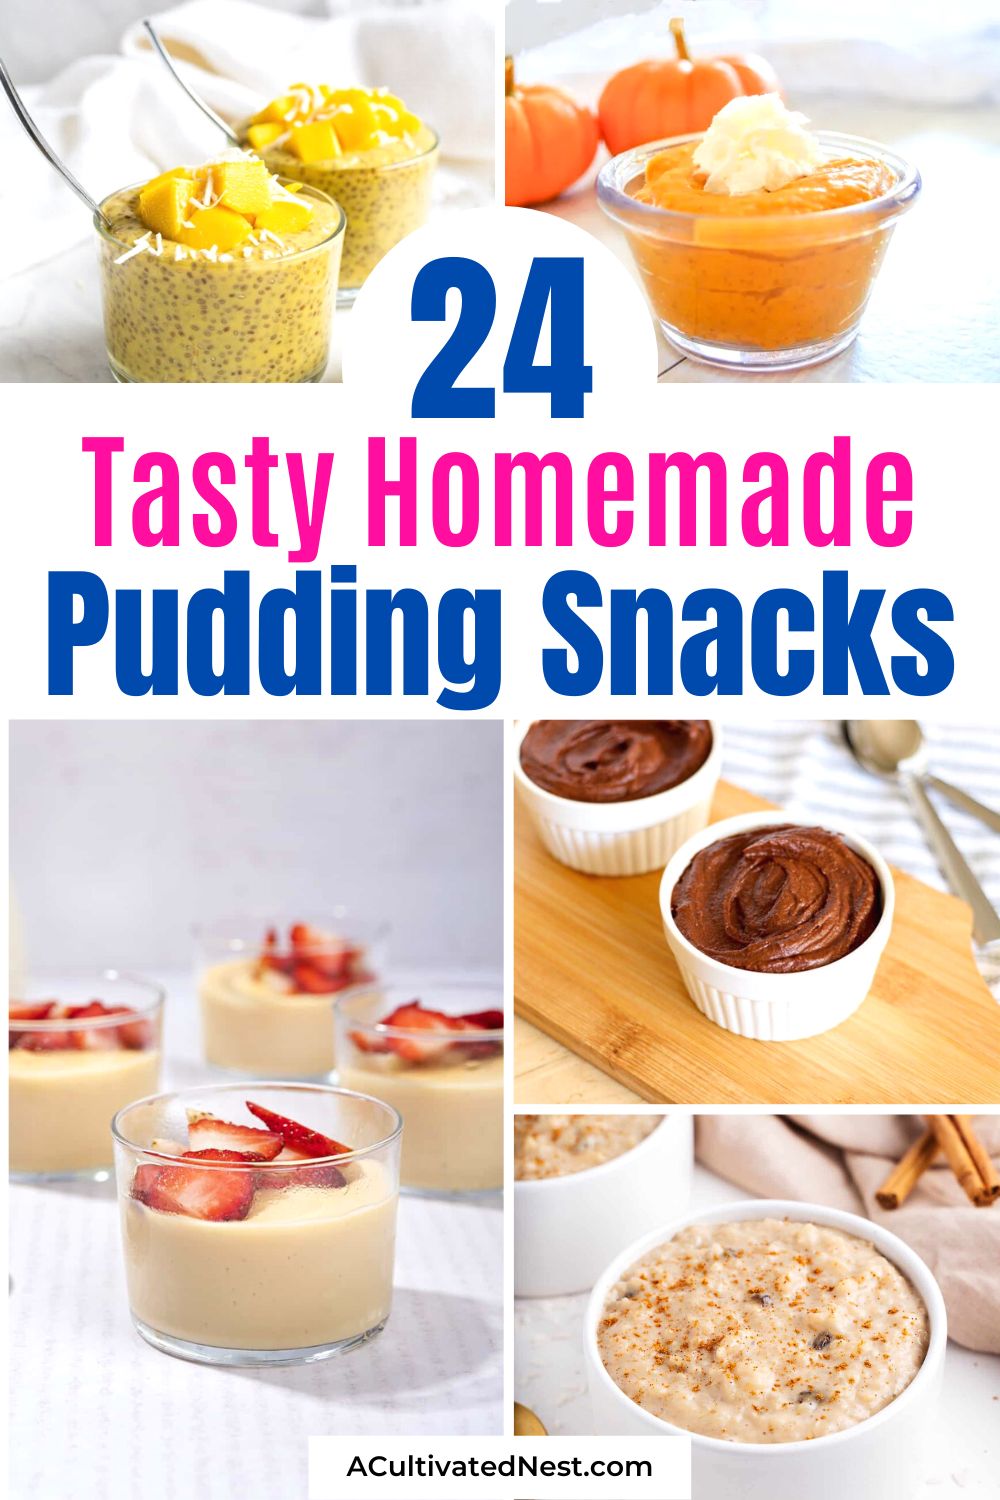 24 Tasty Homemade Pudding Snacks- Satisfy your sweet tooth with these delectable homemade pudding snacks! From classic chocolate to fruity favorites, these recipes are easy to make and impossible to resist. #snackRecipes #homemadePudding #snackIdeas #recipes #ACultivatedNest